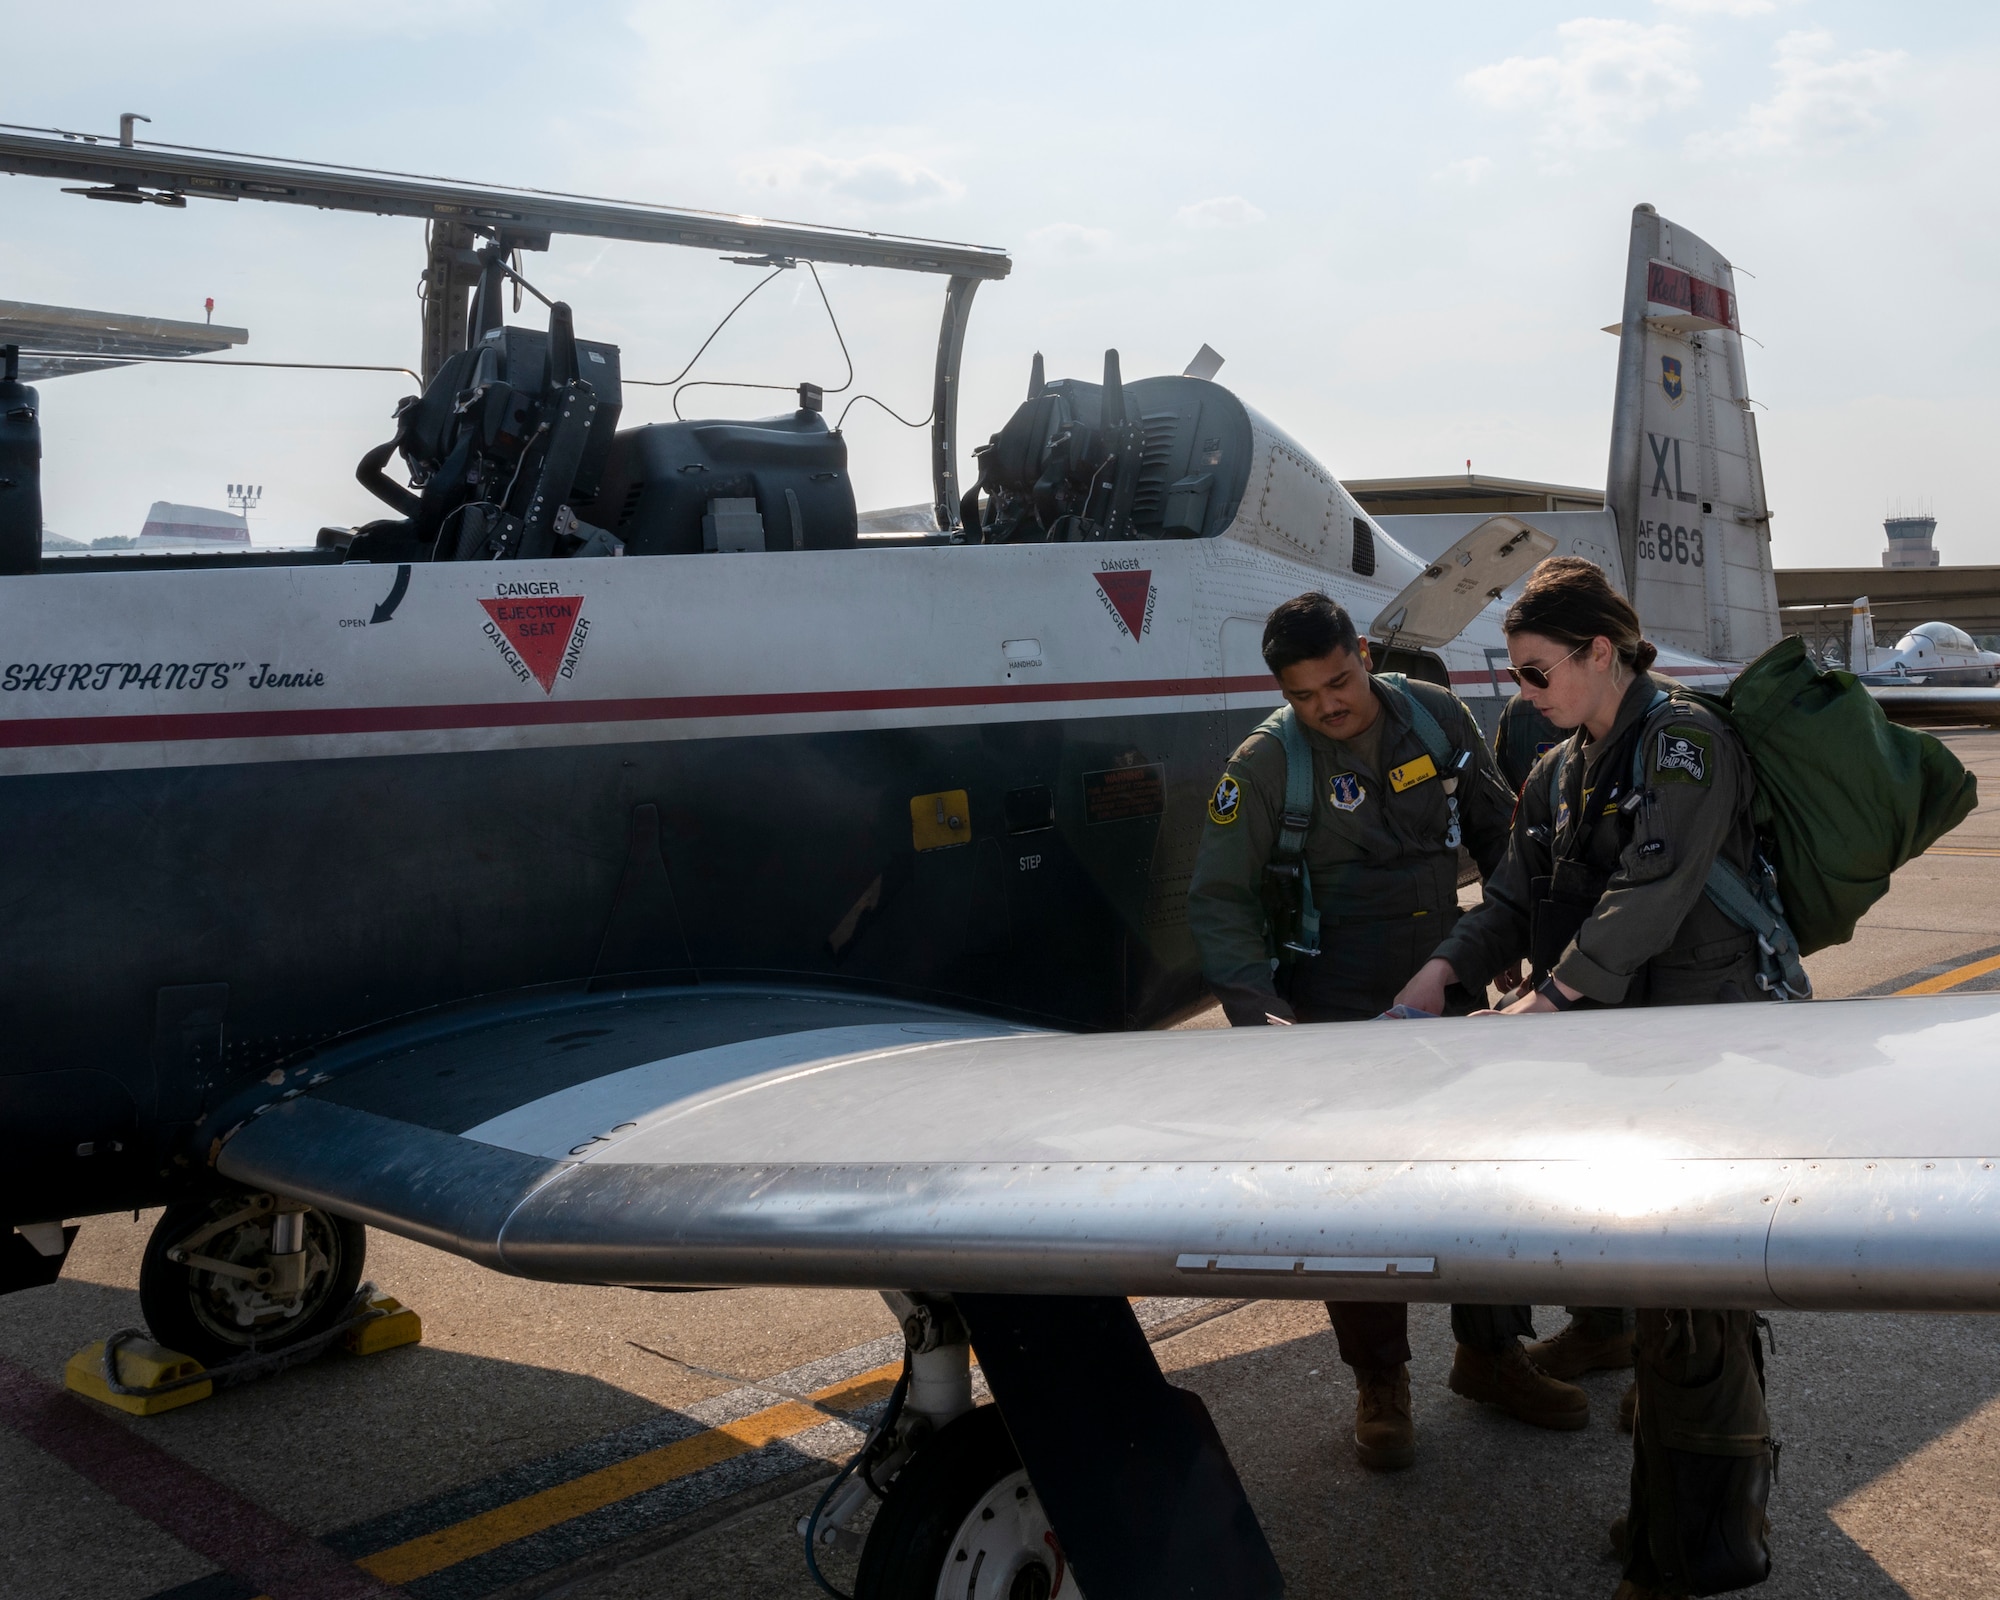 U.S. Air Force 2nd Lt. Christopher Ugale, a student pilot with the 47th Student Squadron, looks over his final pre flight checklist with before entering a T-6 Texan II for his Dollar Flight with, U.S. Air Force Capt. Sarah Fotsch at Laughlin Air Force Base, Texas on August 4, 2021.  The Dollar Flight is the first flight in a real aircraft for a student pilot and marks a major milestone in the career of a pilot. (U.S. Air Force Photo by Senior Airman Nicholas Larsen)